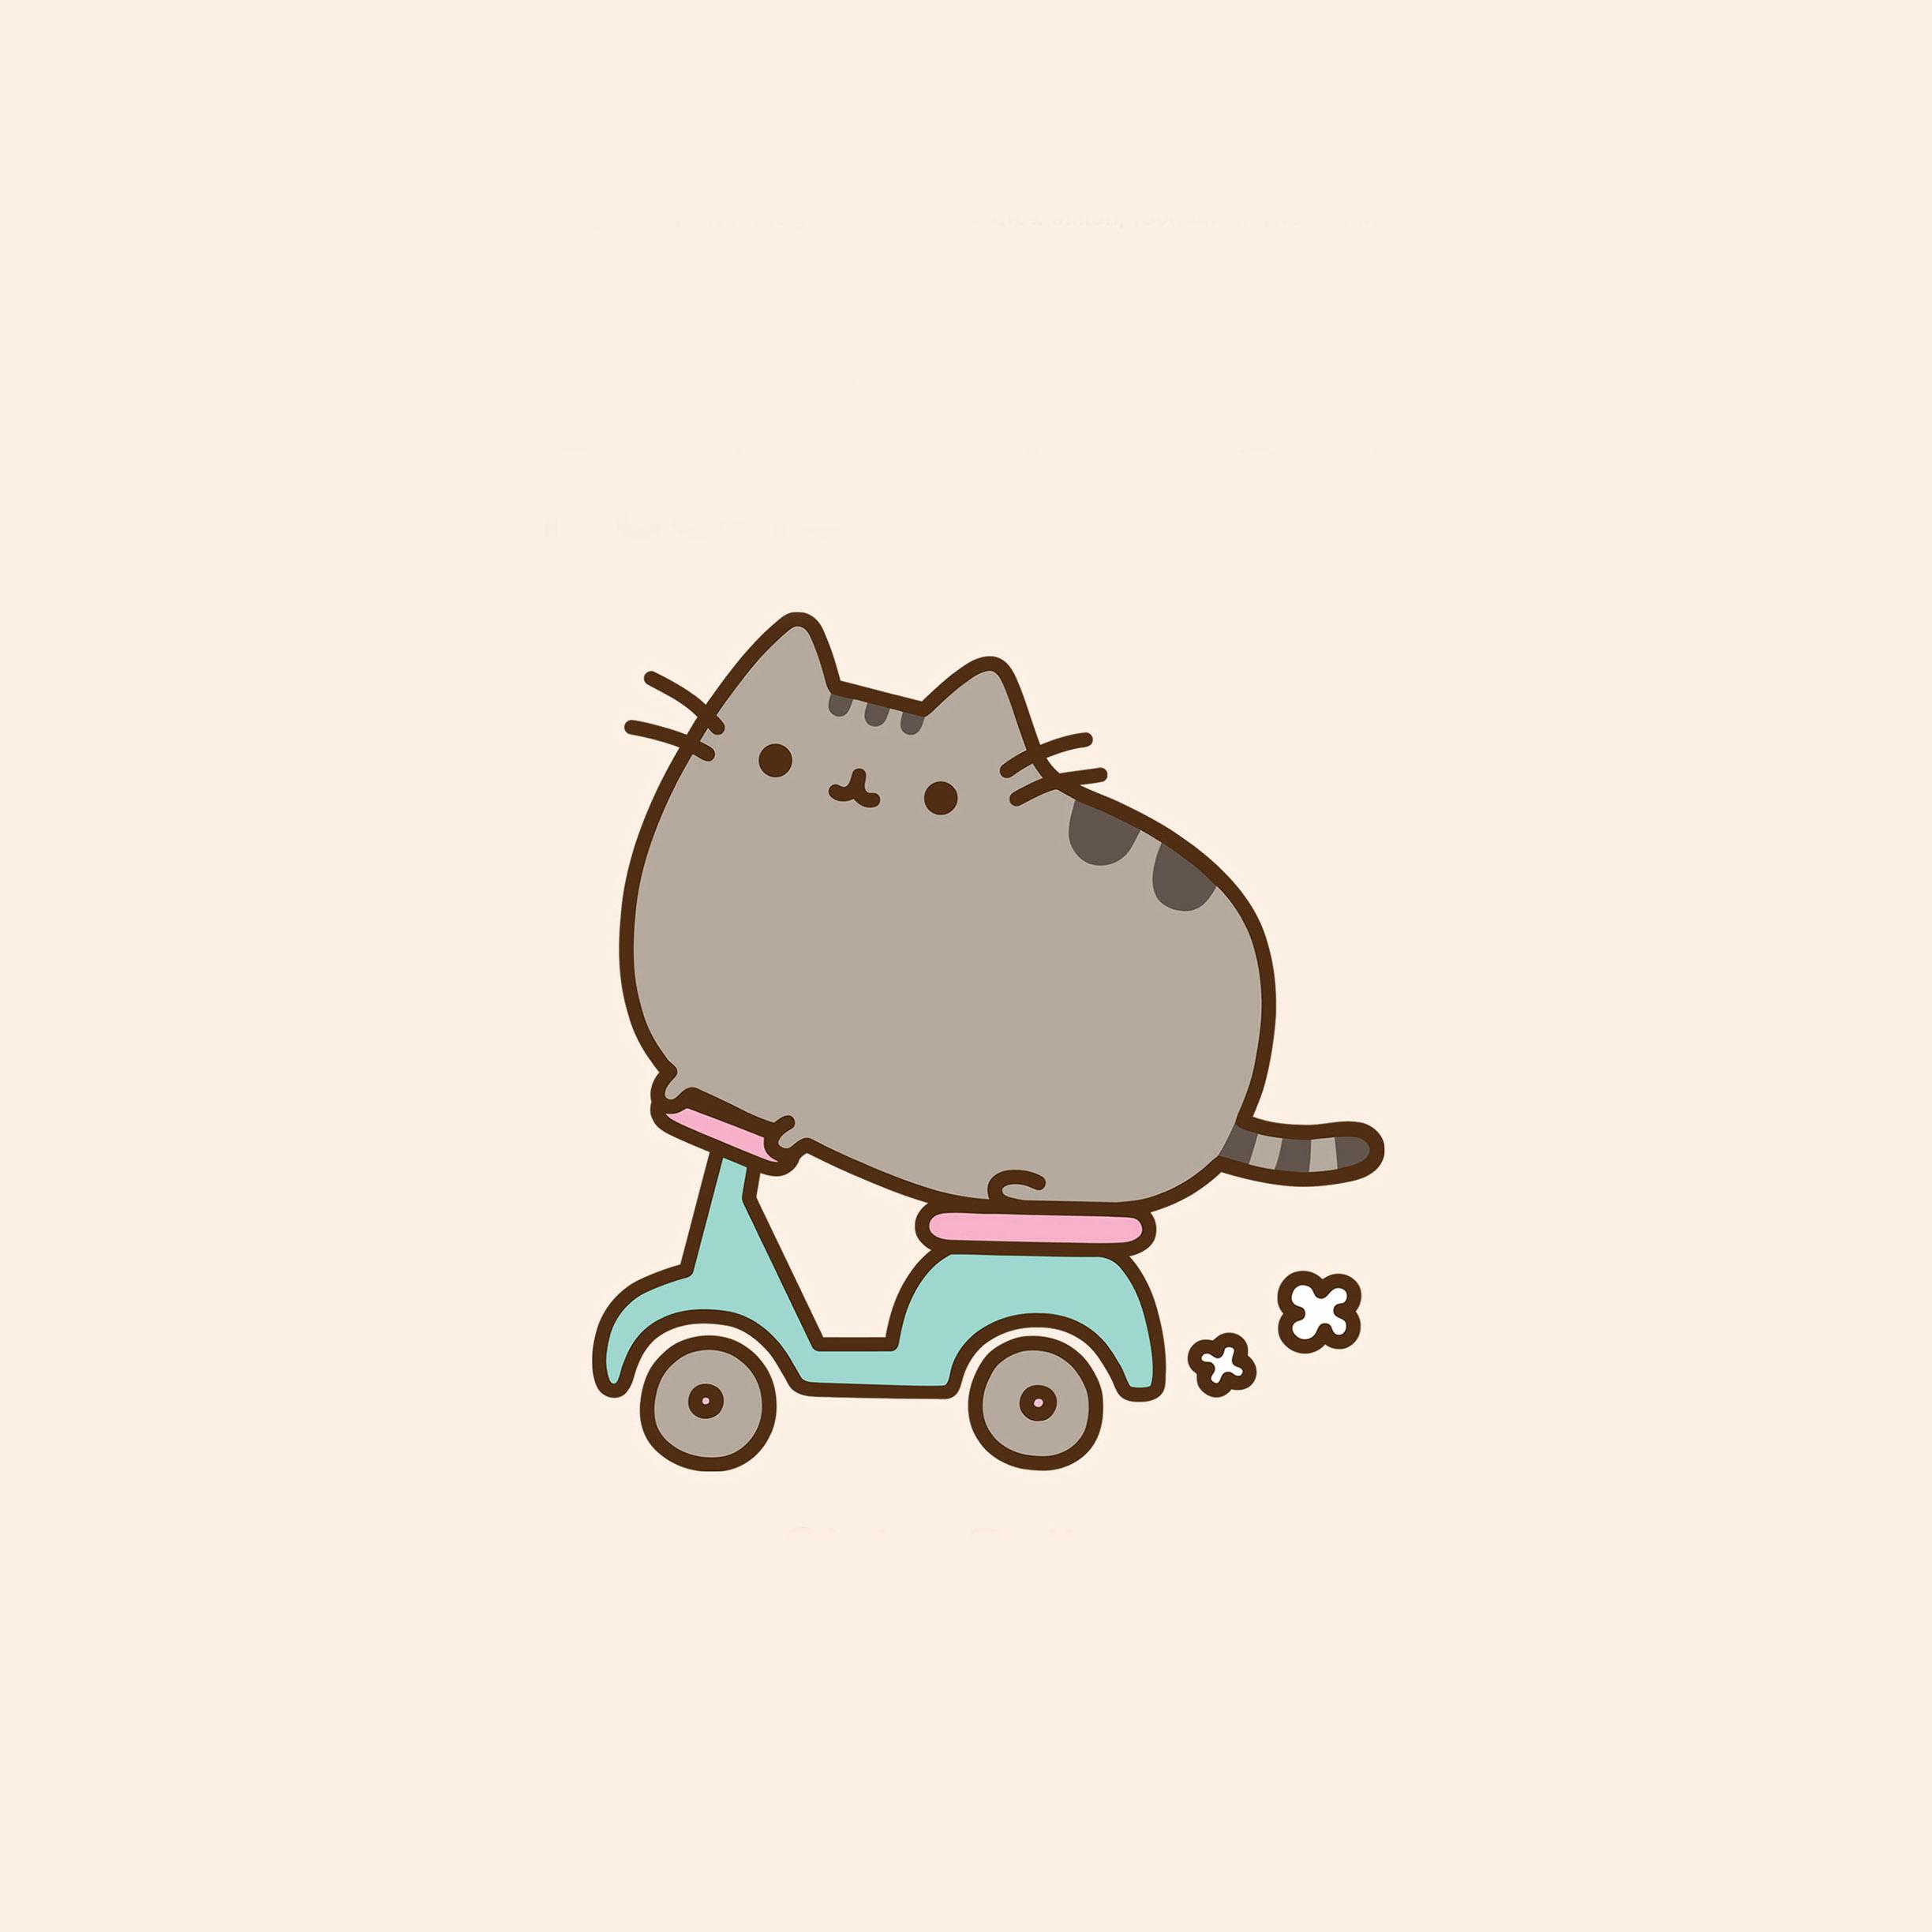 Pusheen The Cat Wallpaper. Awesome